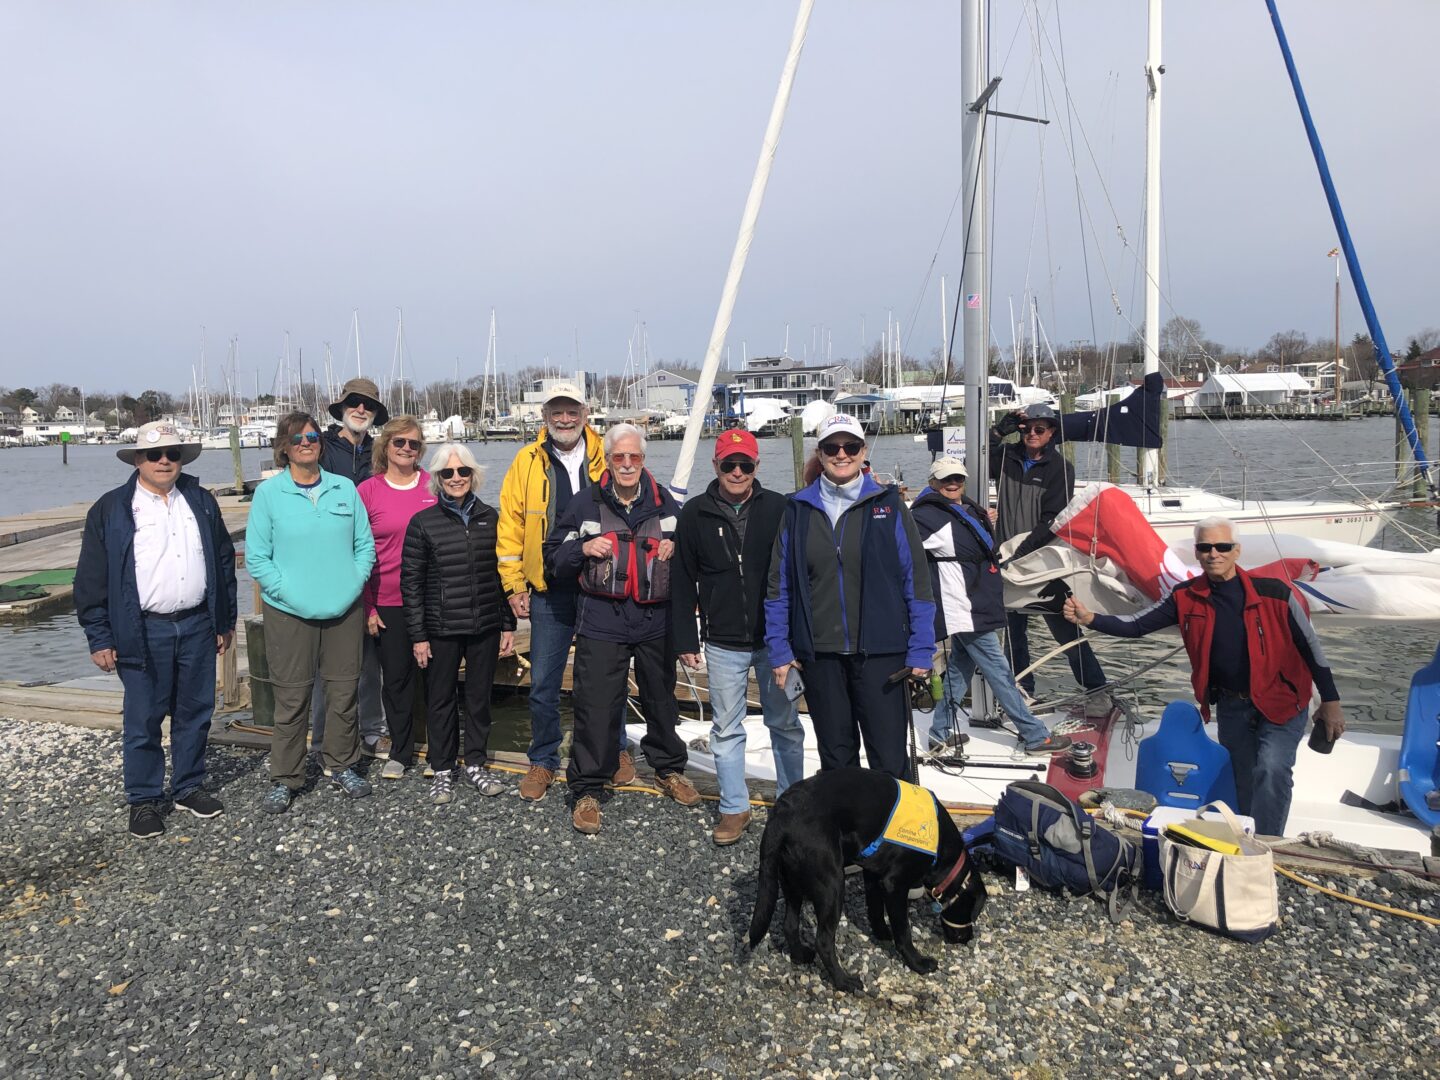 Group photo of CRAB volunteers on dock near CRAB sail boats in the background. 